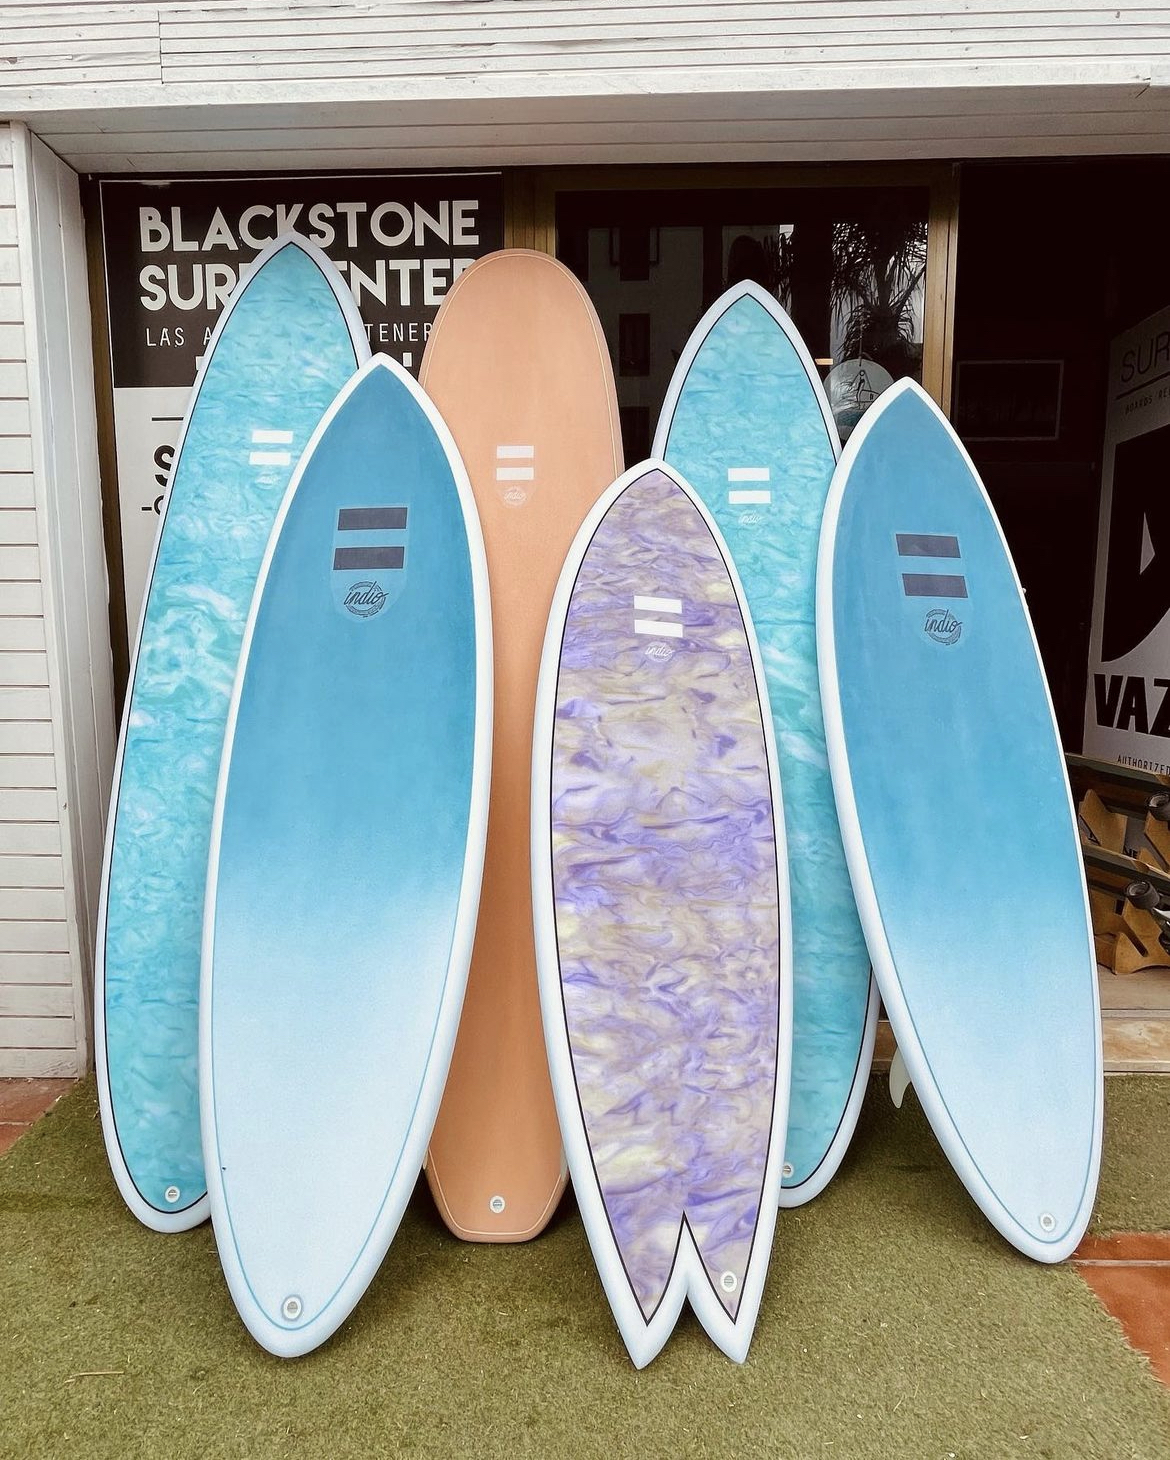 The best INDIO surfboards are available everday in Blackstone Surf Center in Playa las Américas in Tenerife